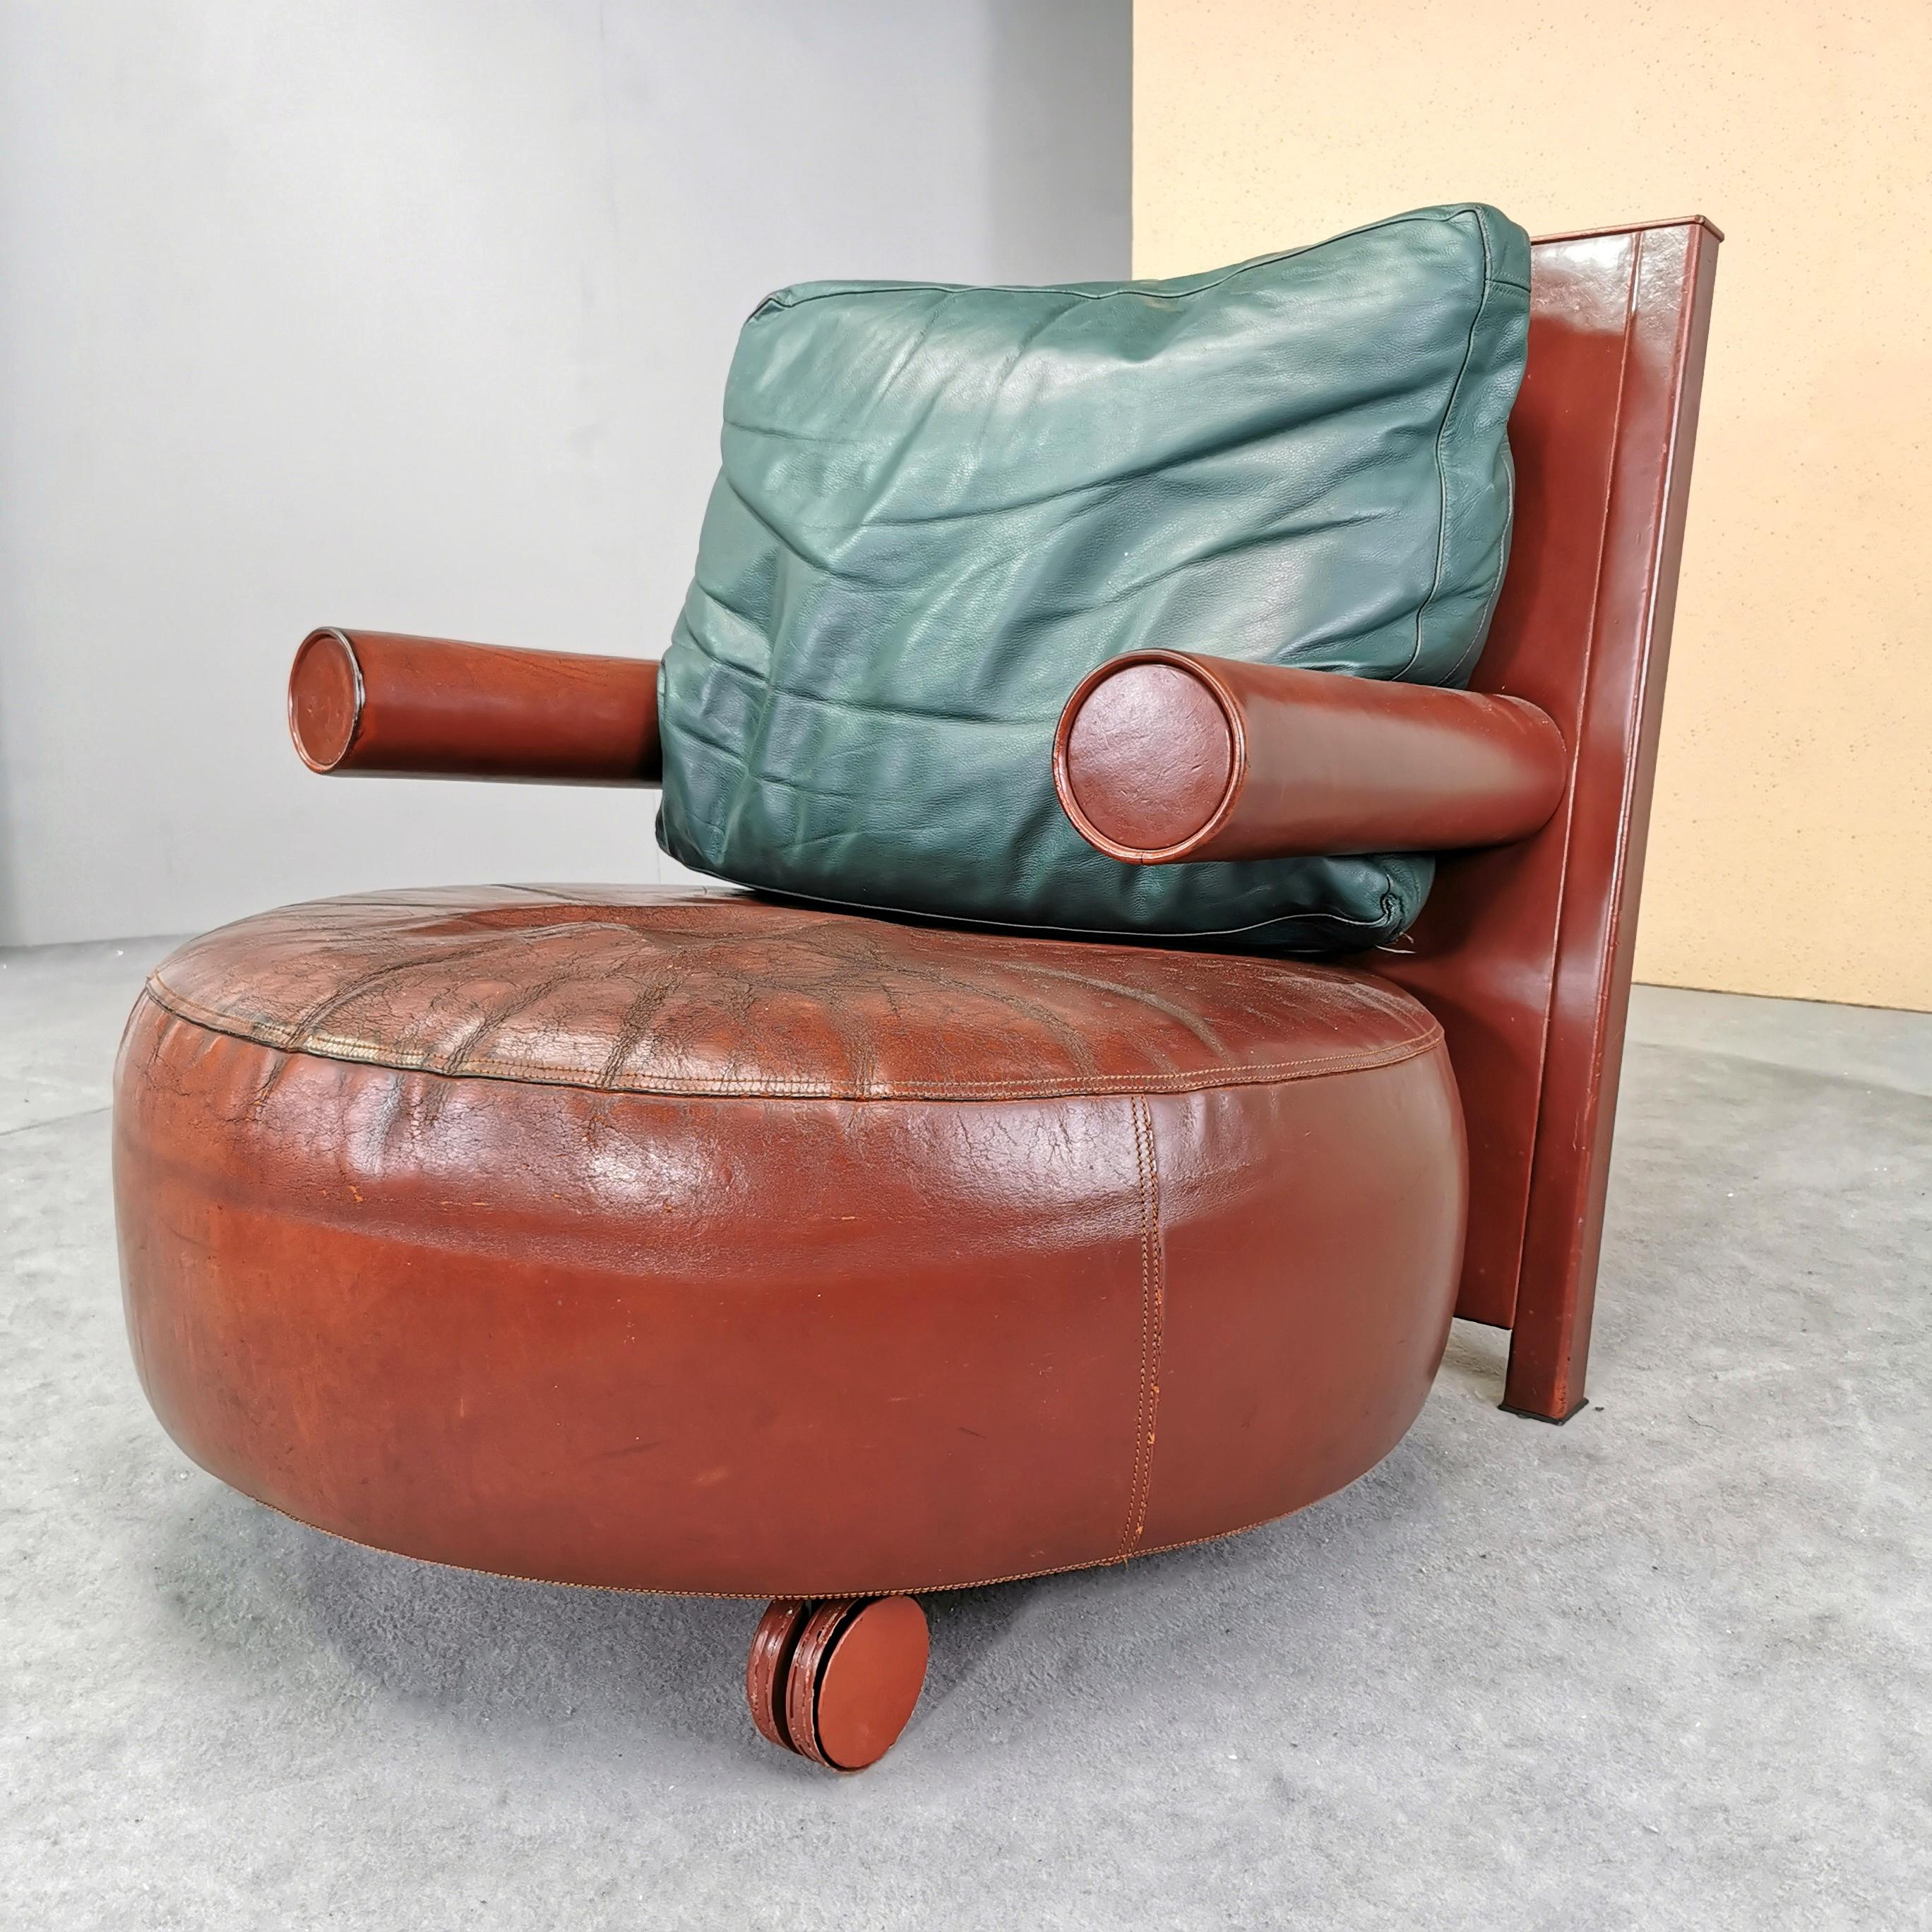 Vintage 1980s Baisity armchair in two-tone burgundy red and English green leather.
 The chair is in good overall condition with normal signs of use of time. 